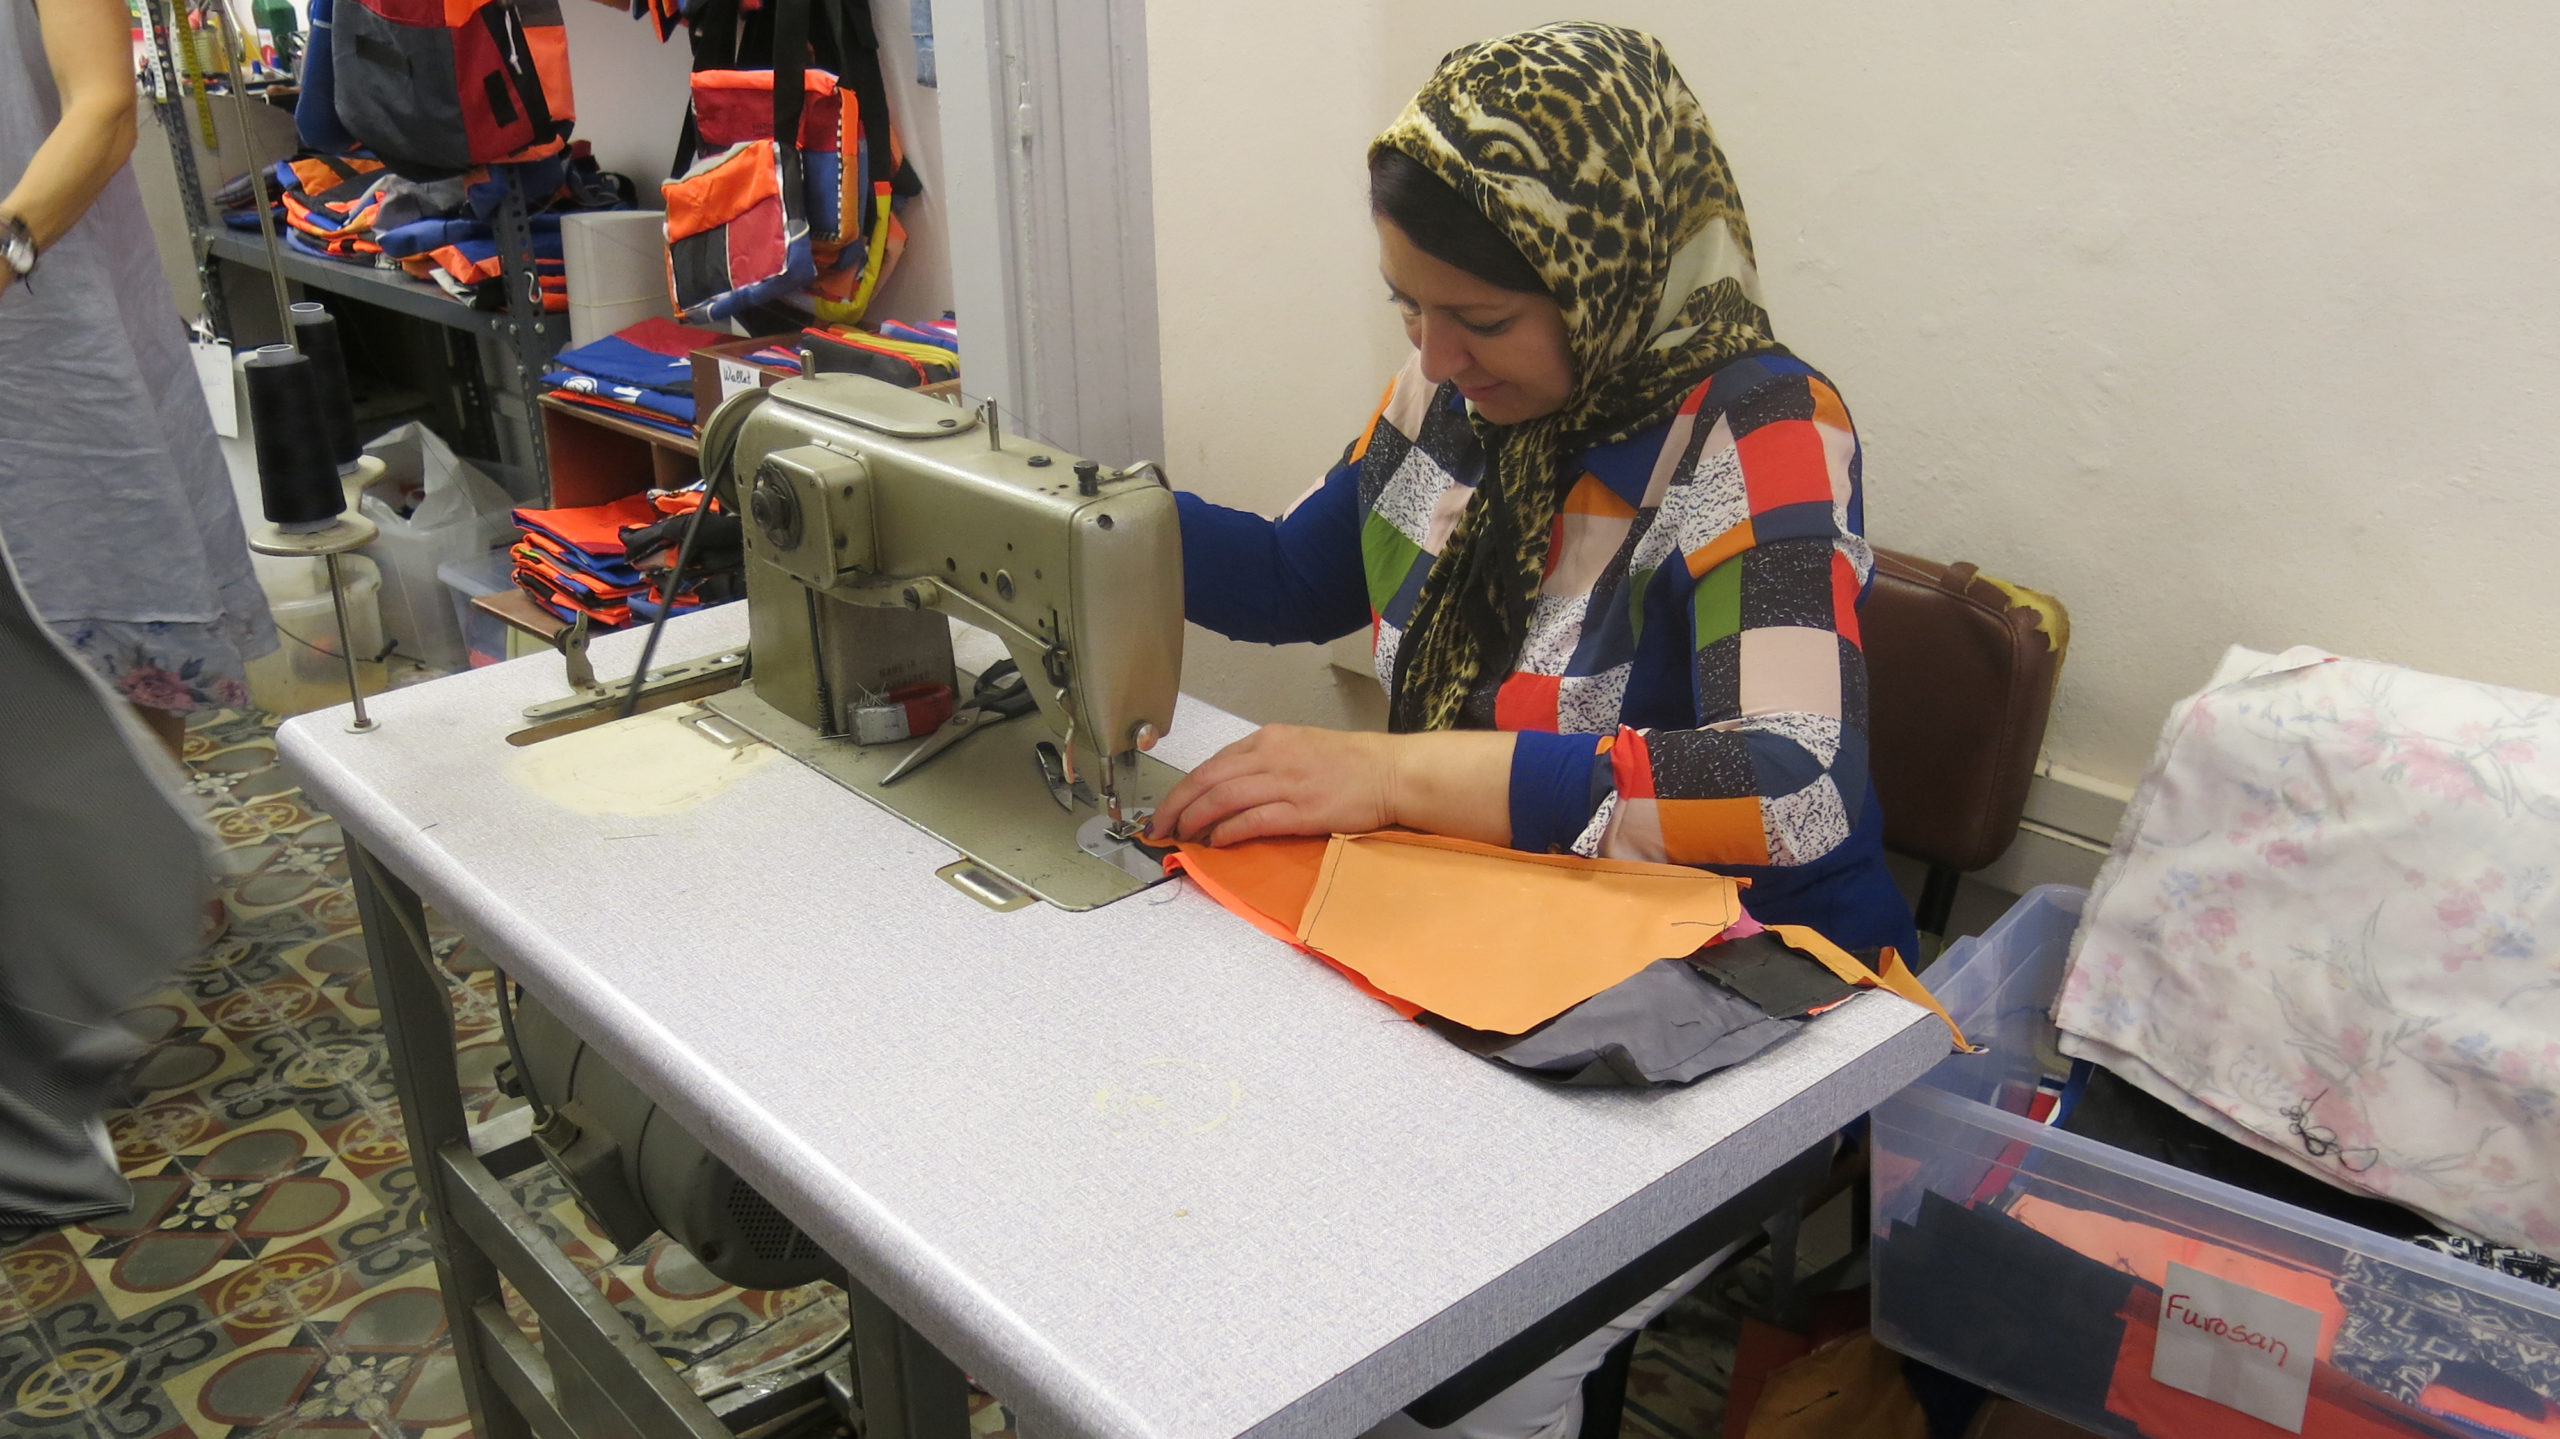 A woman is seated using a sewing machine in a workshop filled with colorful bags.